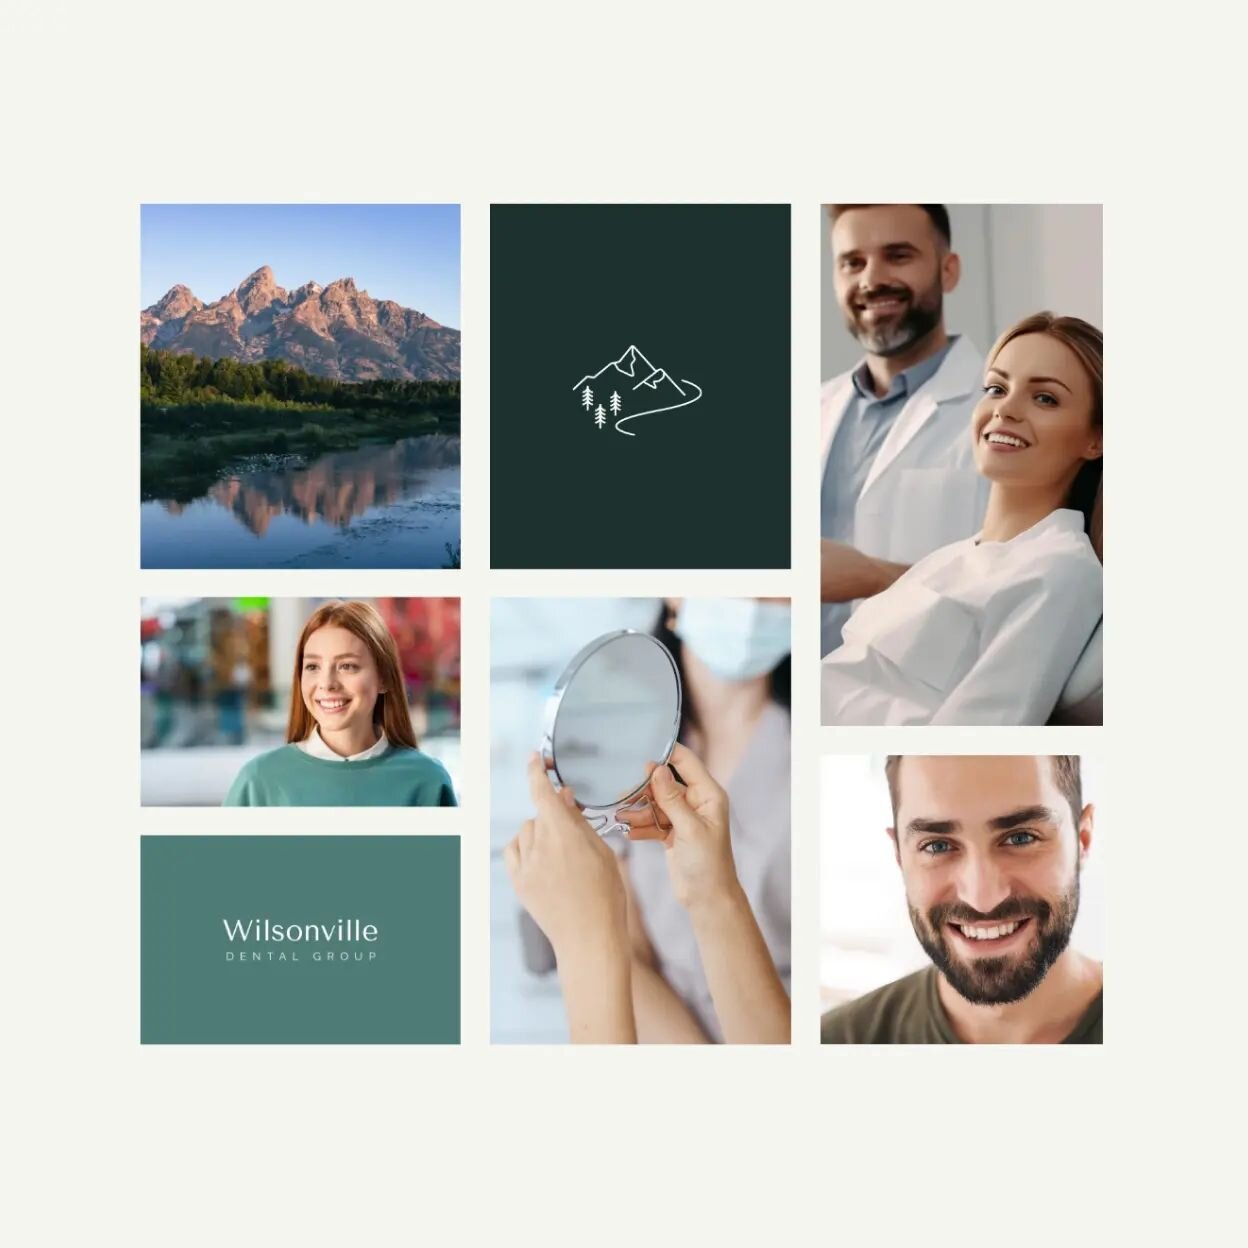 🌟&nbsp;Project Showcase: Wilsonville Dental Group Branding! 🦷✨

Excited to unveil one of my recent projects &ndash; the new logo and branding for Wilsonville Dental Group! 🪥💙

Check out the full project details on my website - link in bio 📲

👉&